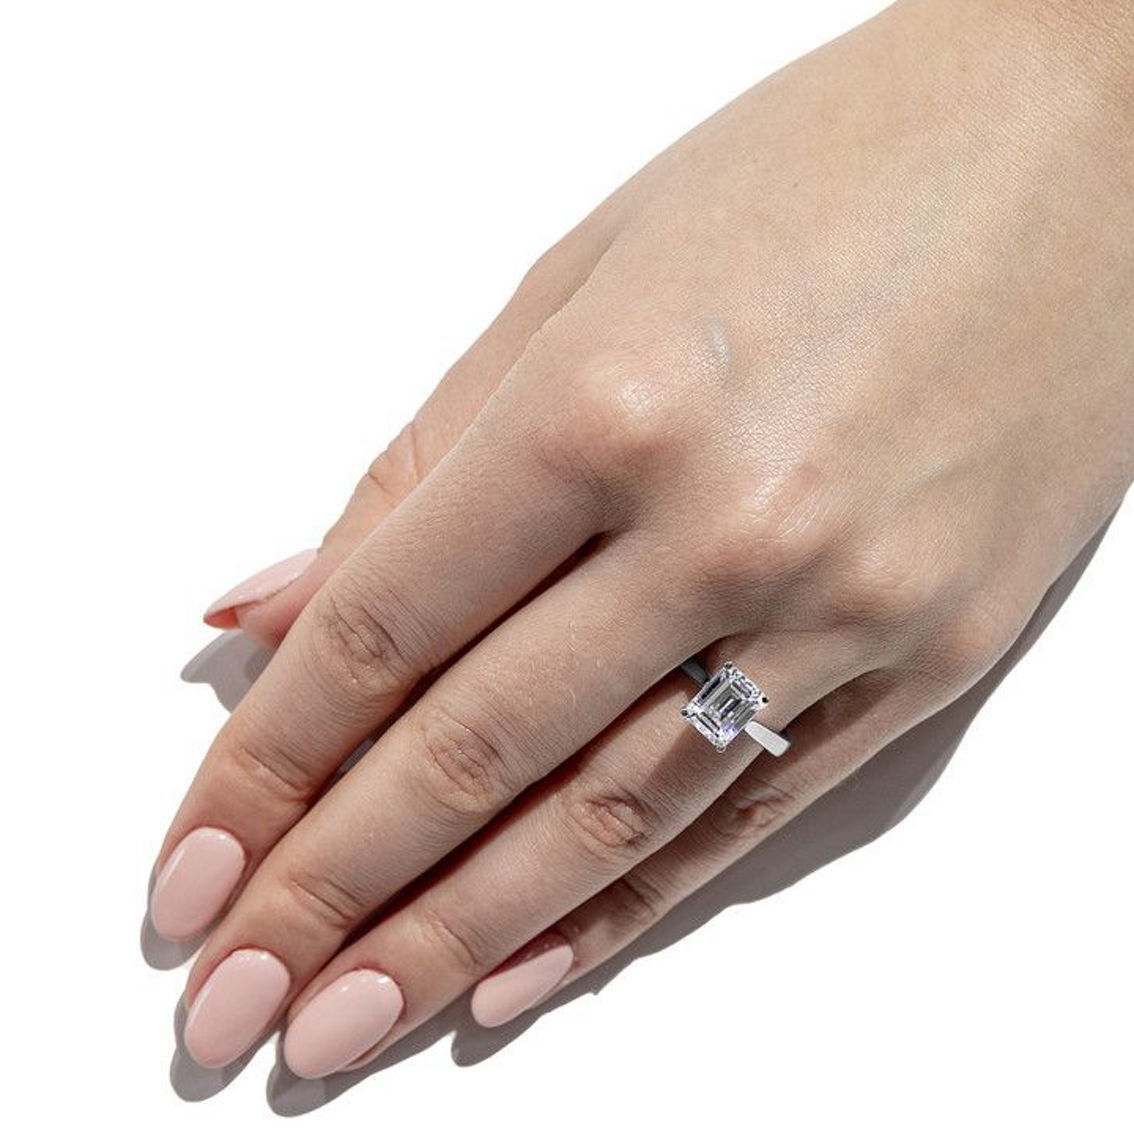 Charles & Colvard 2.52cttw Moissanite Emerald Cut Solitaire Ring in 14k White Gold - Image 3 of 5